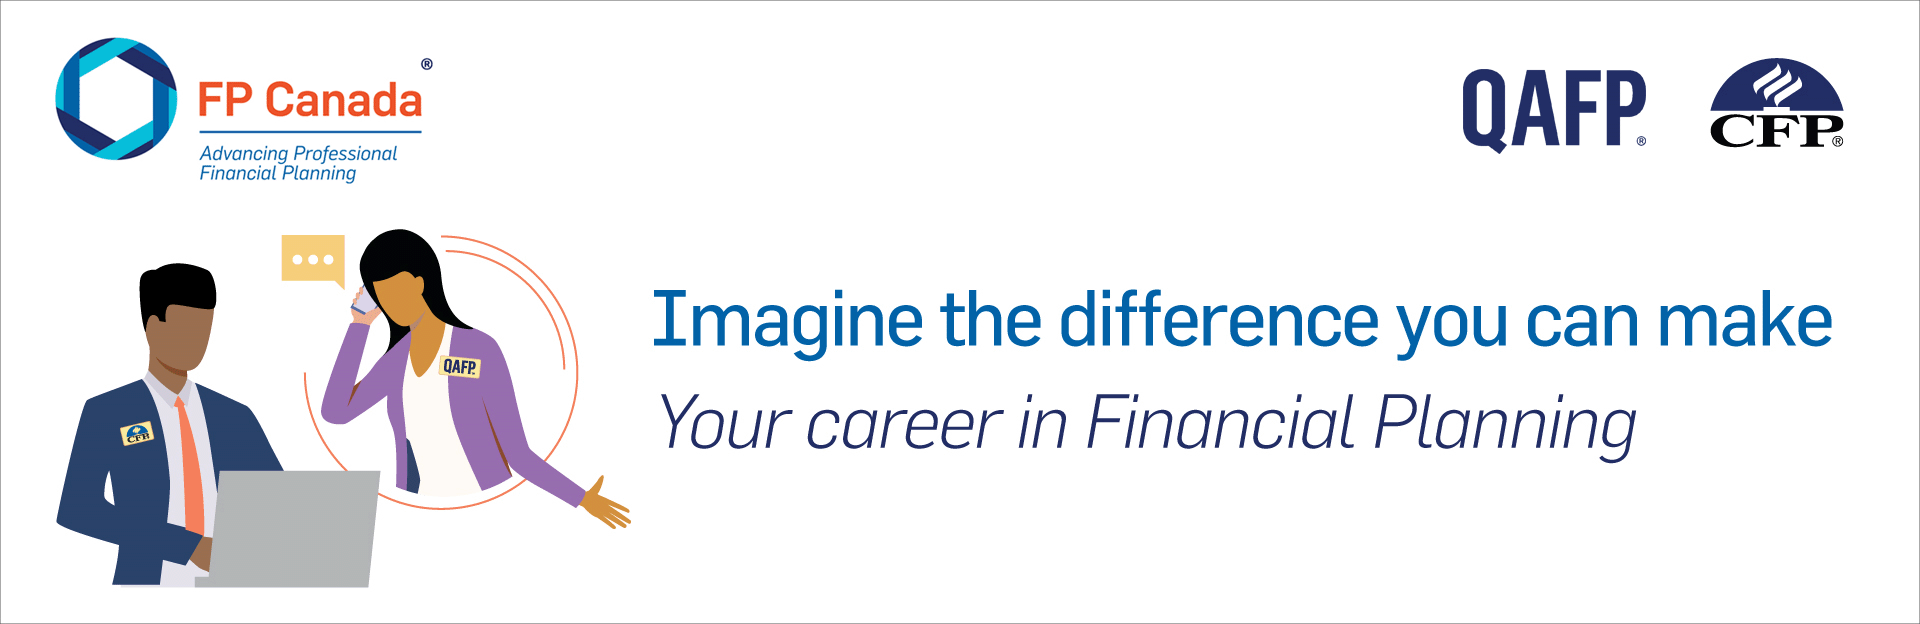 Your career in Financial Planning